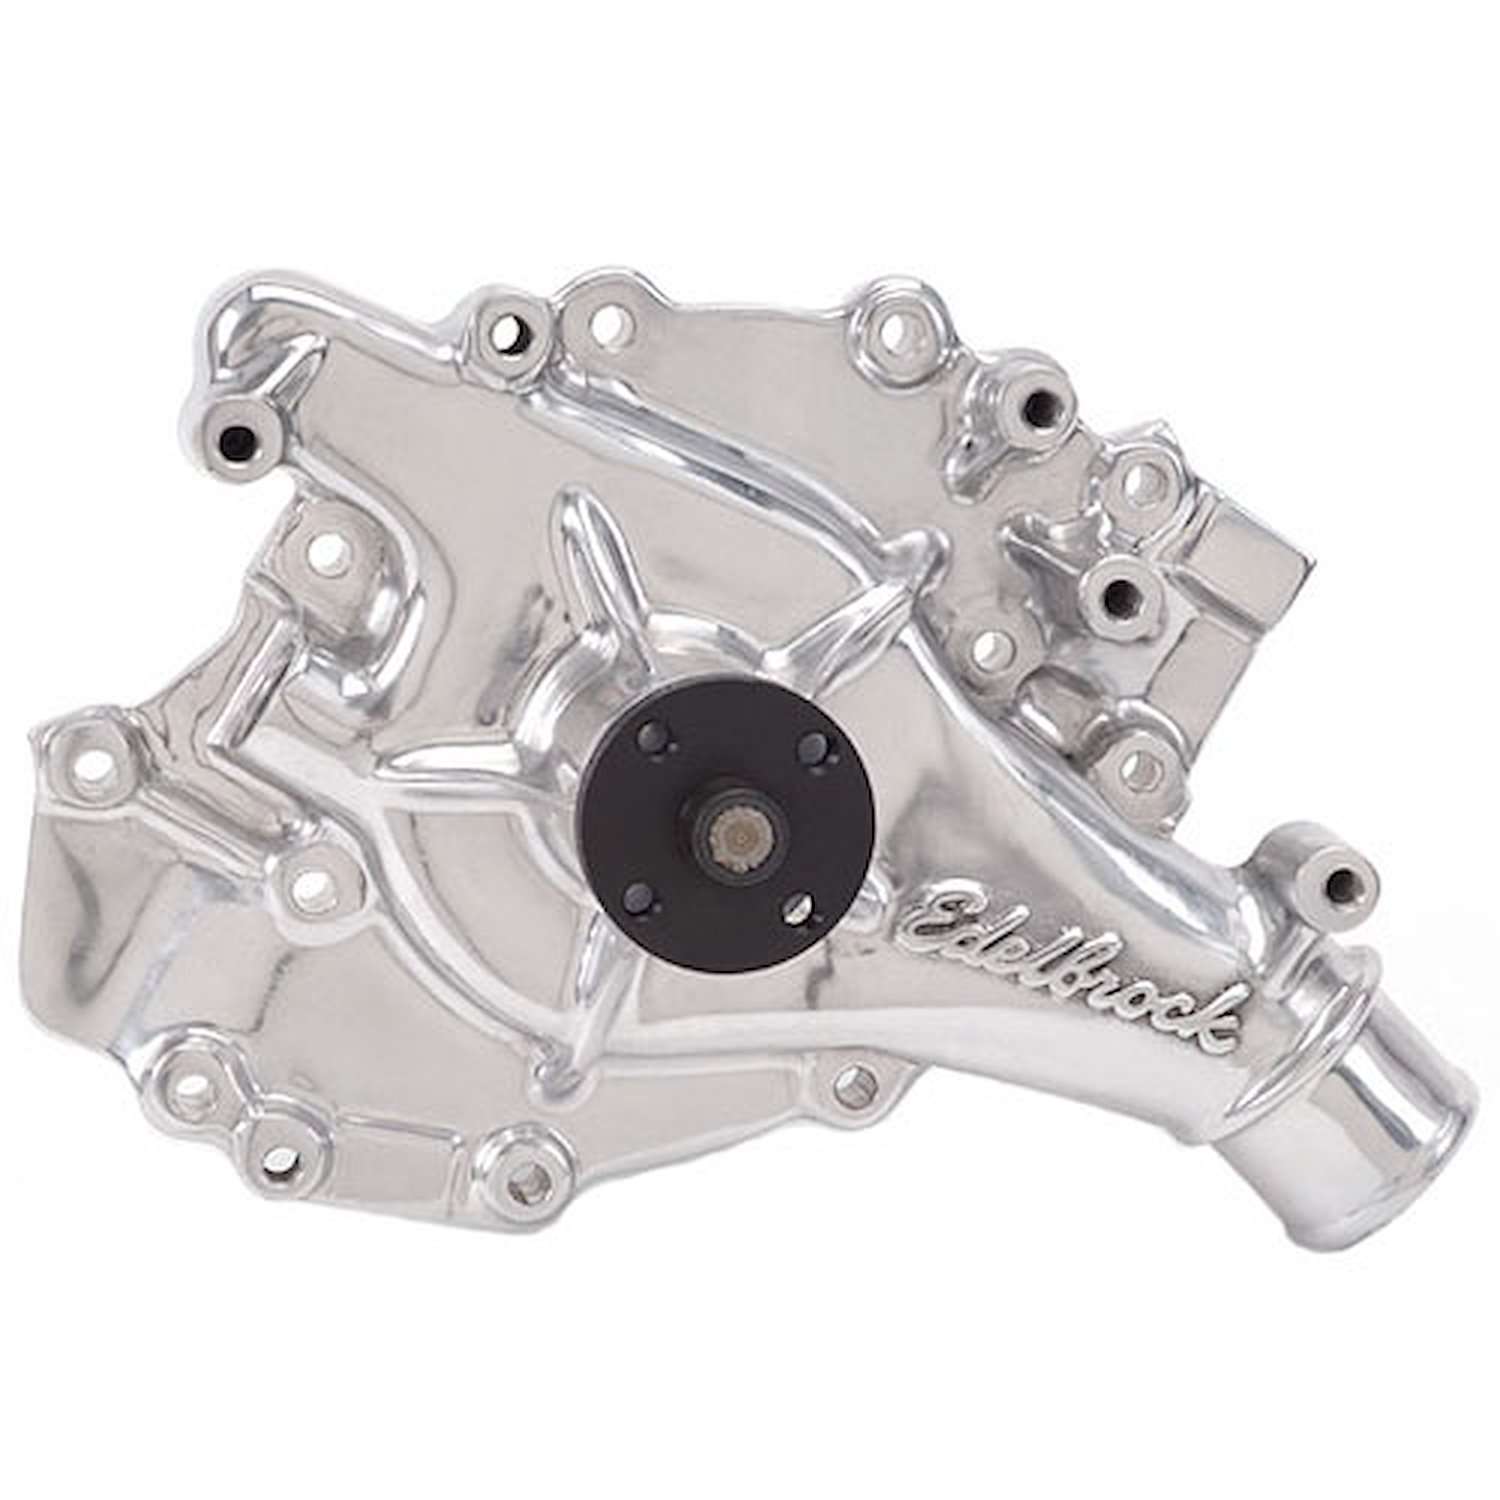 Victor Series Polished Aluminum Water Pump for 1970-1992